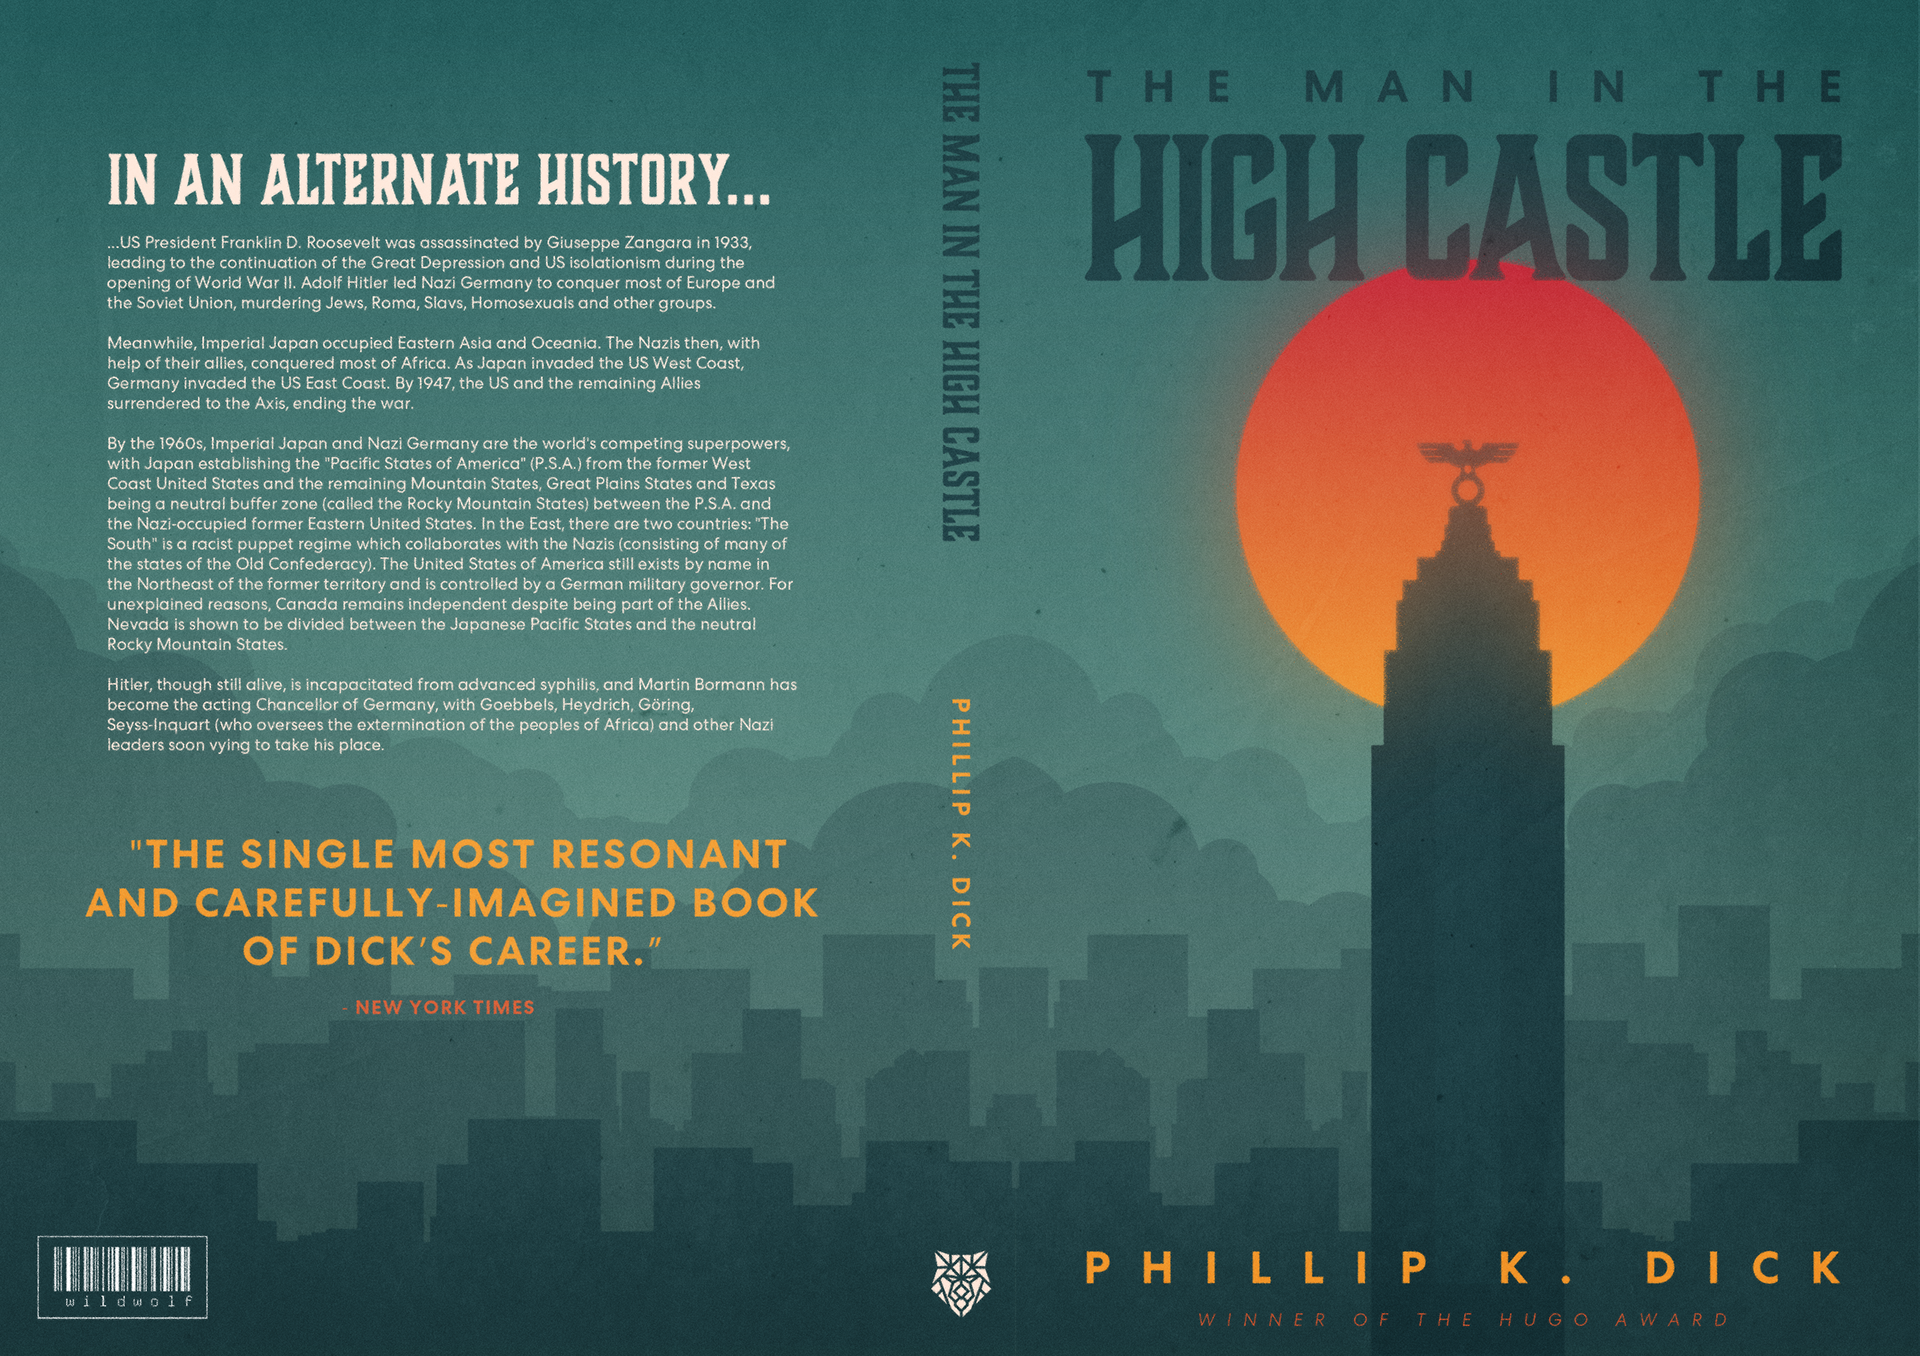 All Covers for The Man in the High Castle